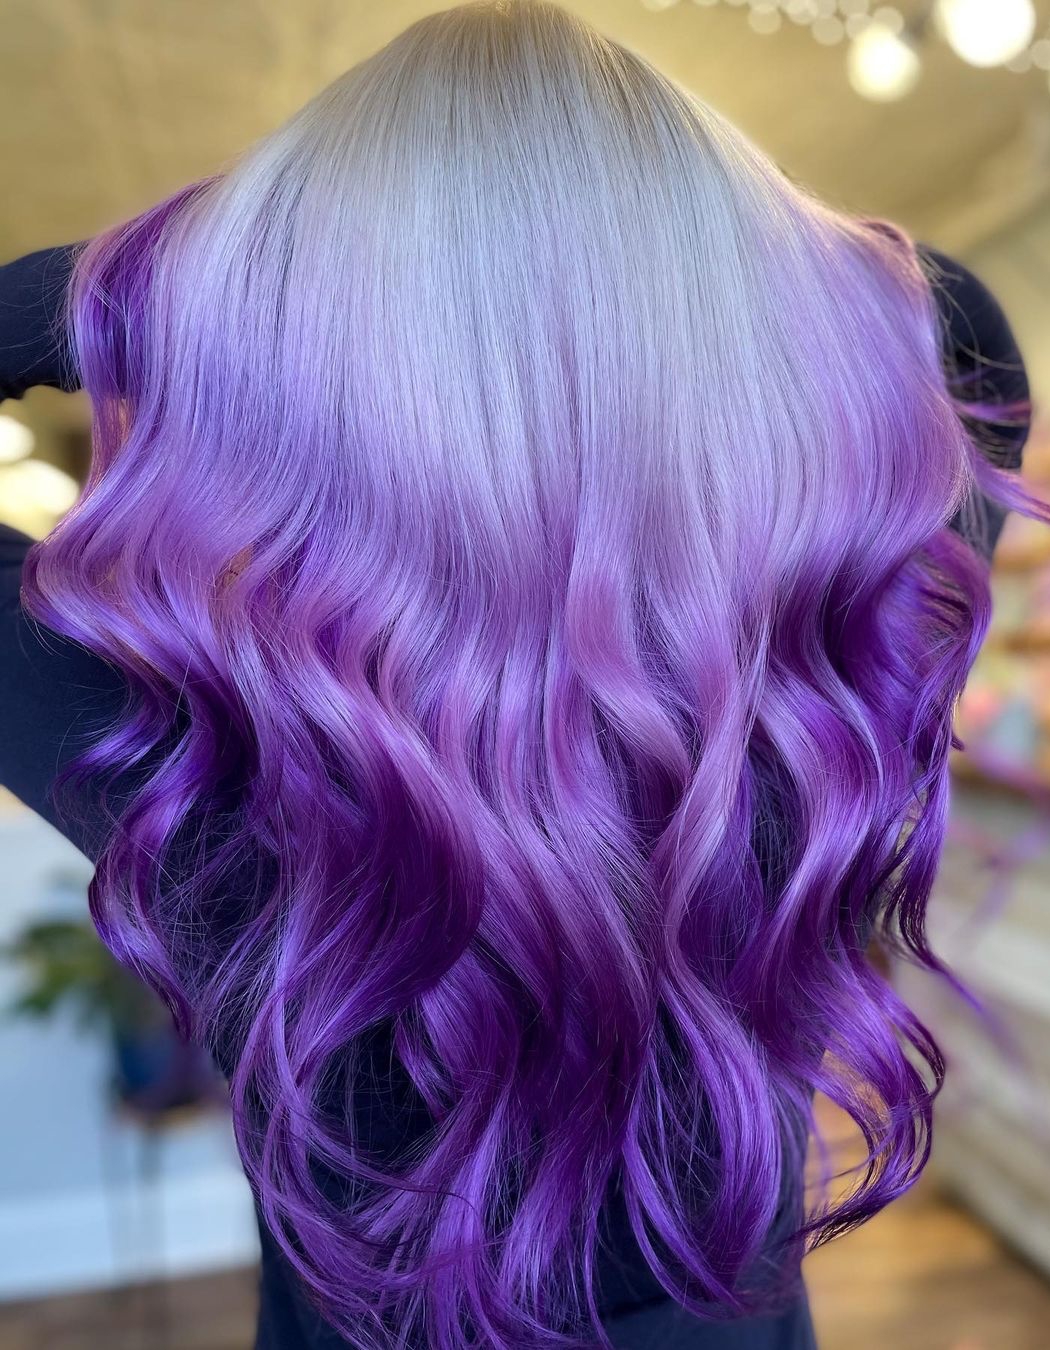 Blonde to Purple Ombre on Long Hair